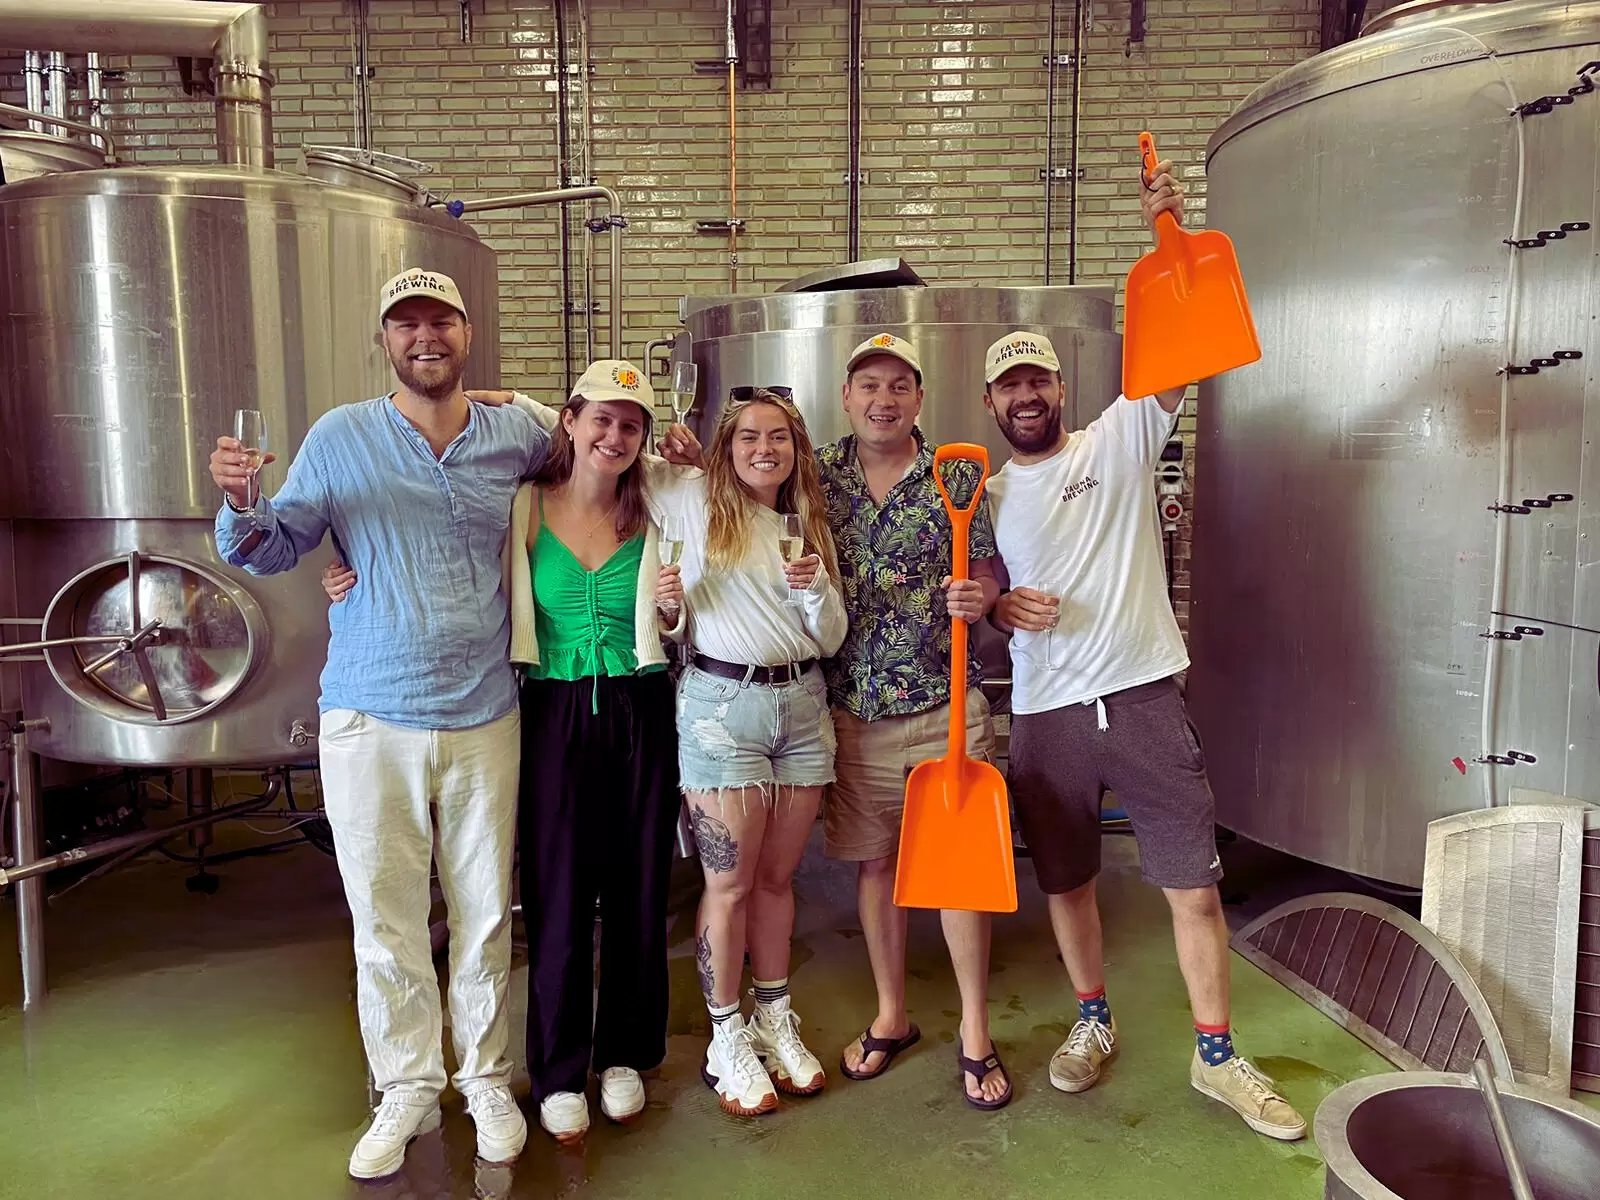 5 people celebrating in front of brewery tanks, wearing branded merchandise and holding brewing tools